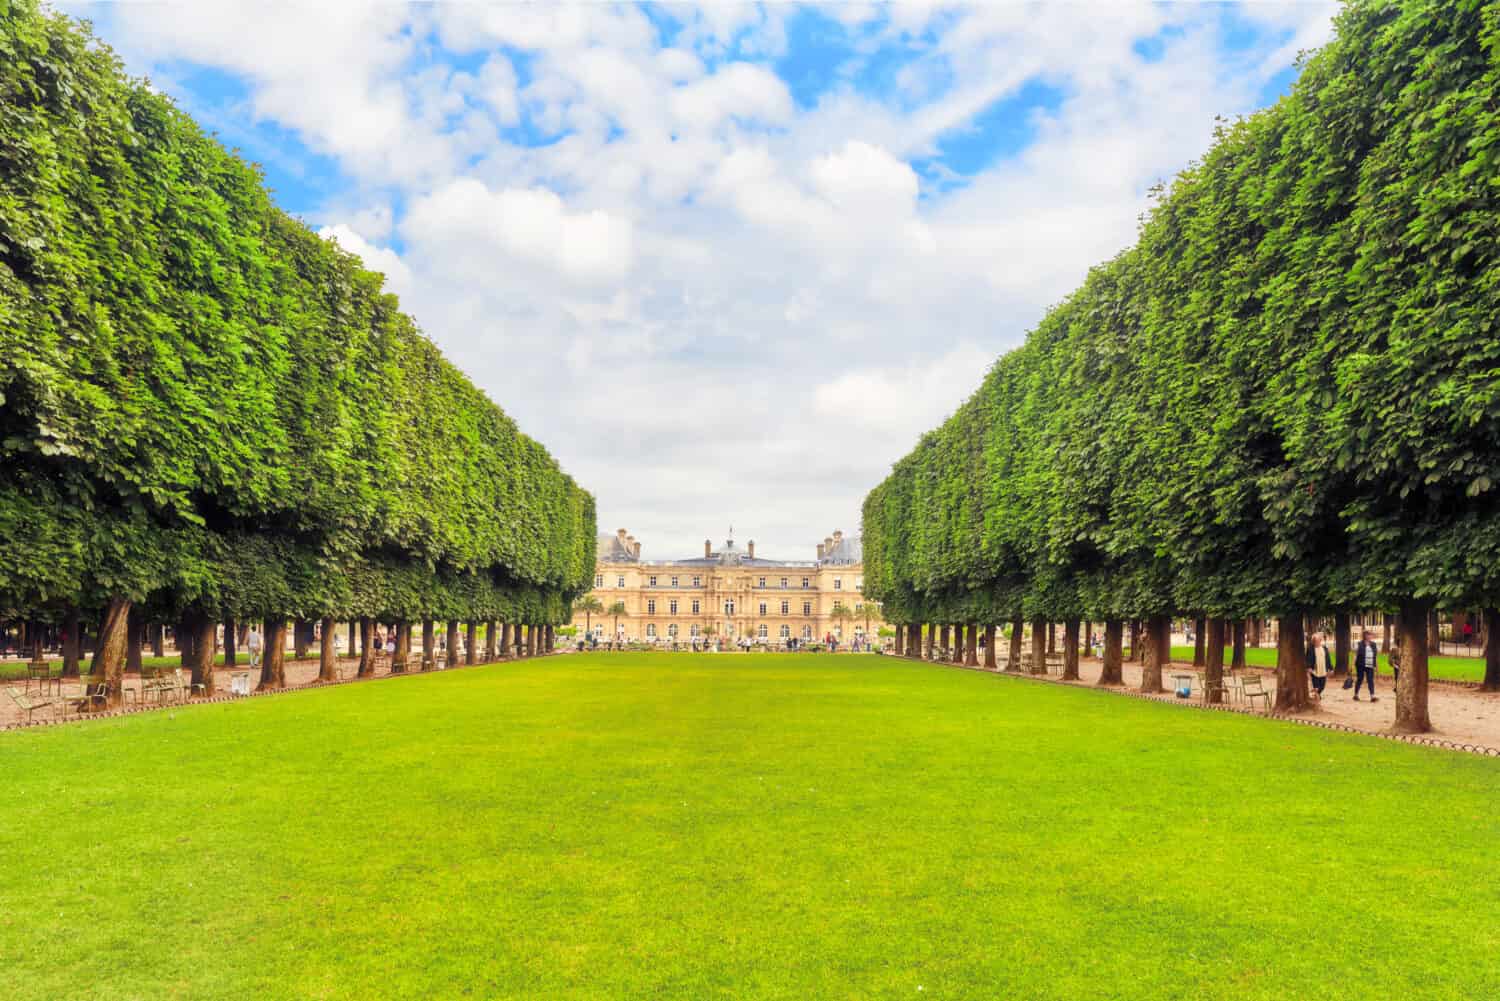 Luxembourg Palace and park in Paris, the Jardin du Luxembourg, one of the most beautiful gardens in Paris. France.